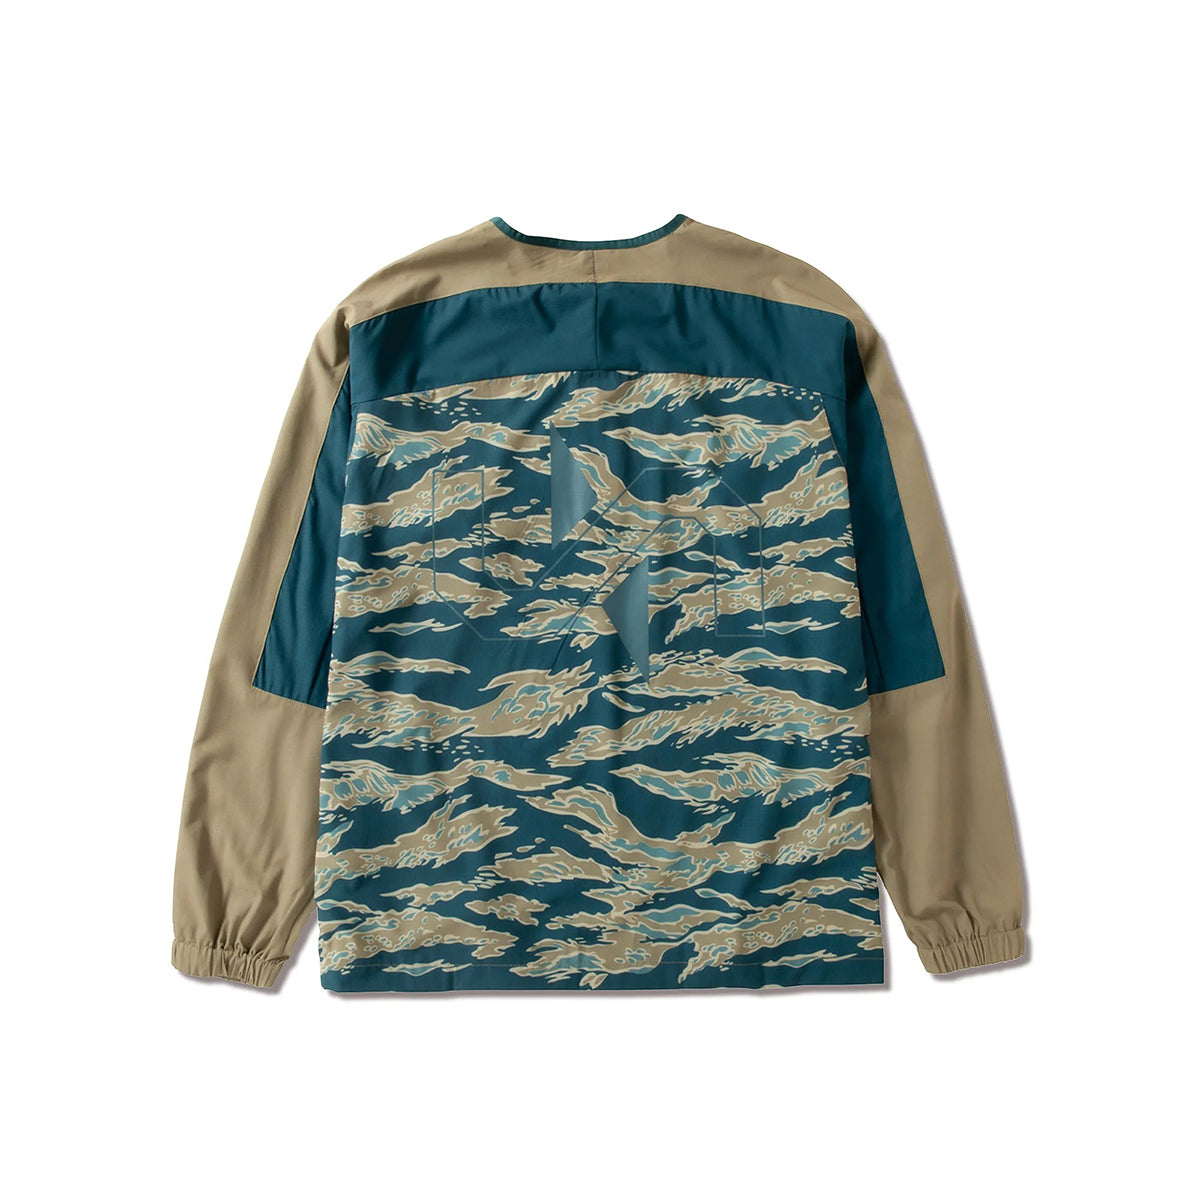 UNCAGED PULLOVER SHOOTING SHIRTS 【9月9日以降発送予定】